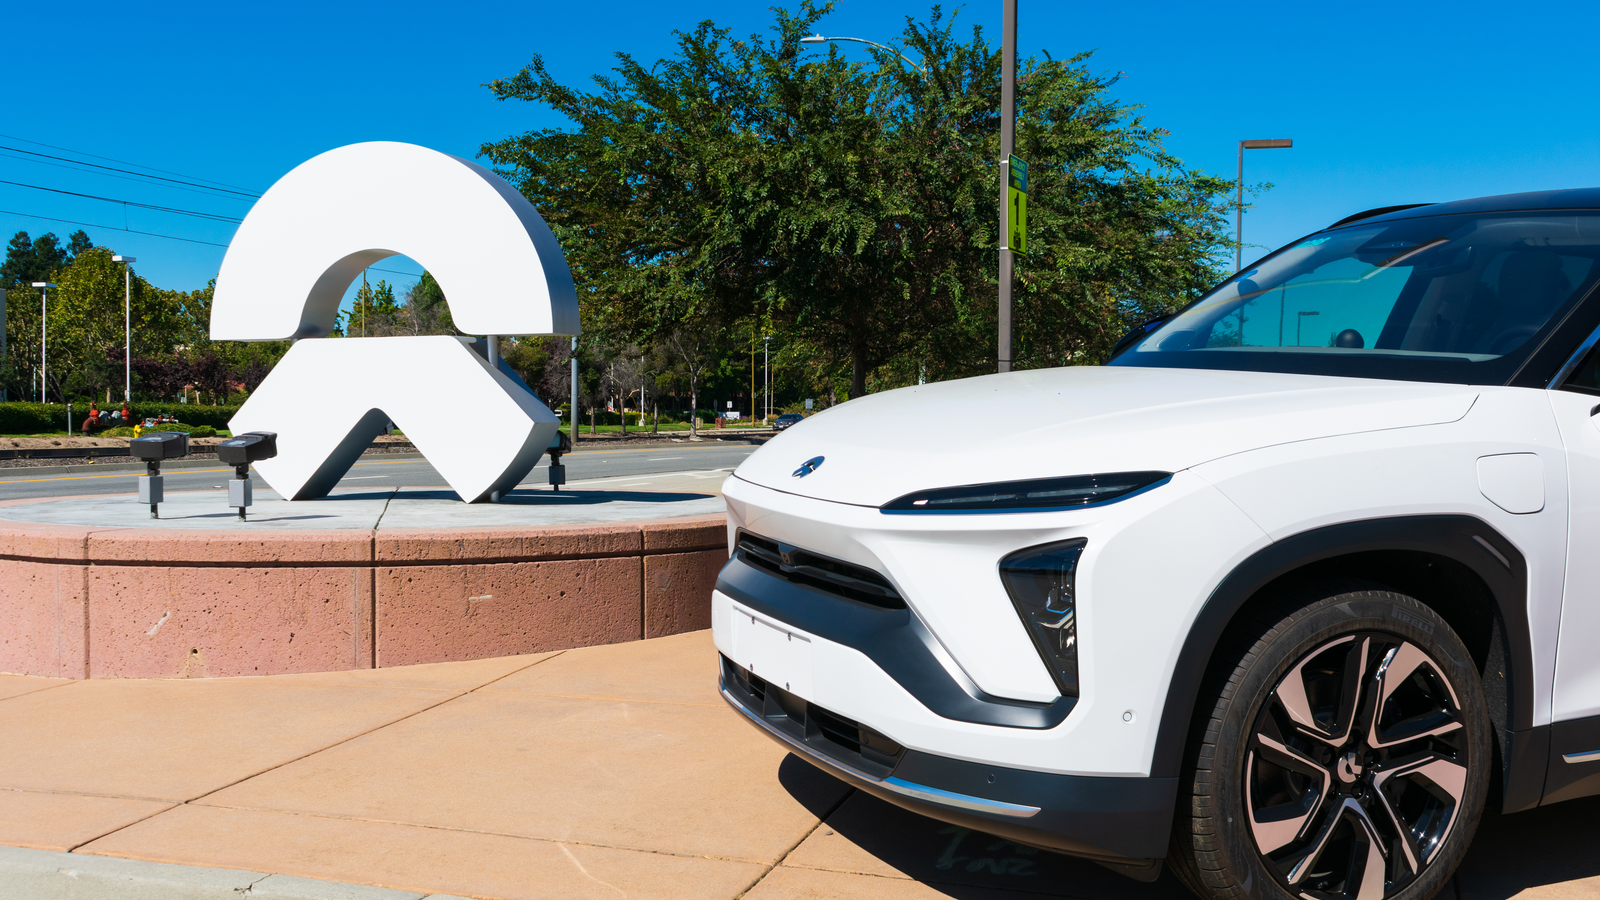 Chinese EV Stocks NIO Stock ES6 electric SUV semi-autonomous car on display near Chinese automobile manufacturer NIO software development office in Silicon Valley. Chinese EV companies like NIO are in the news.